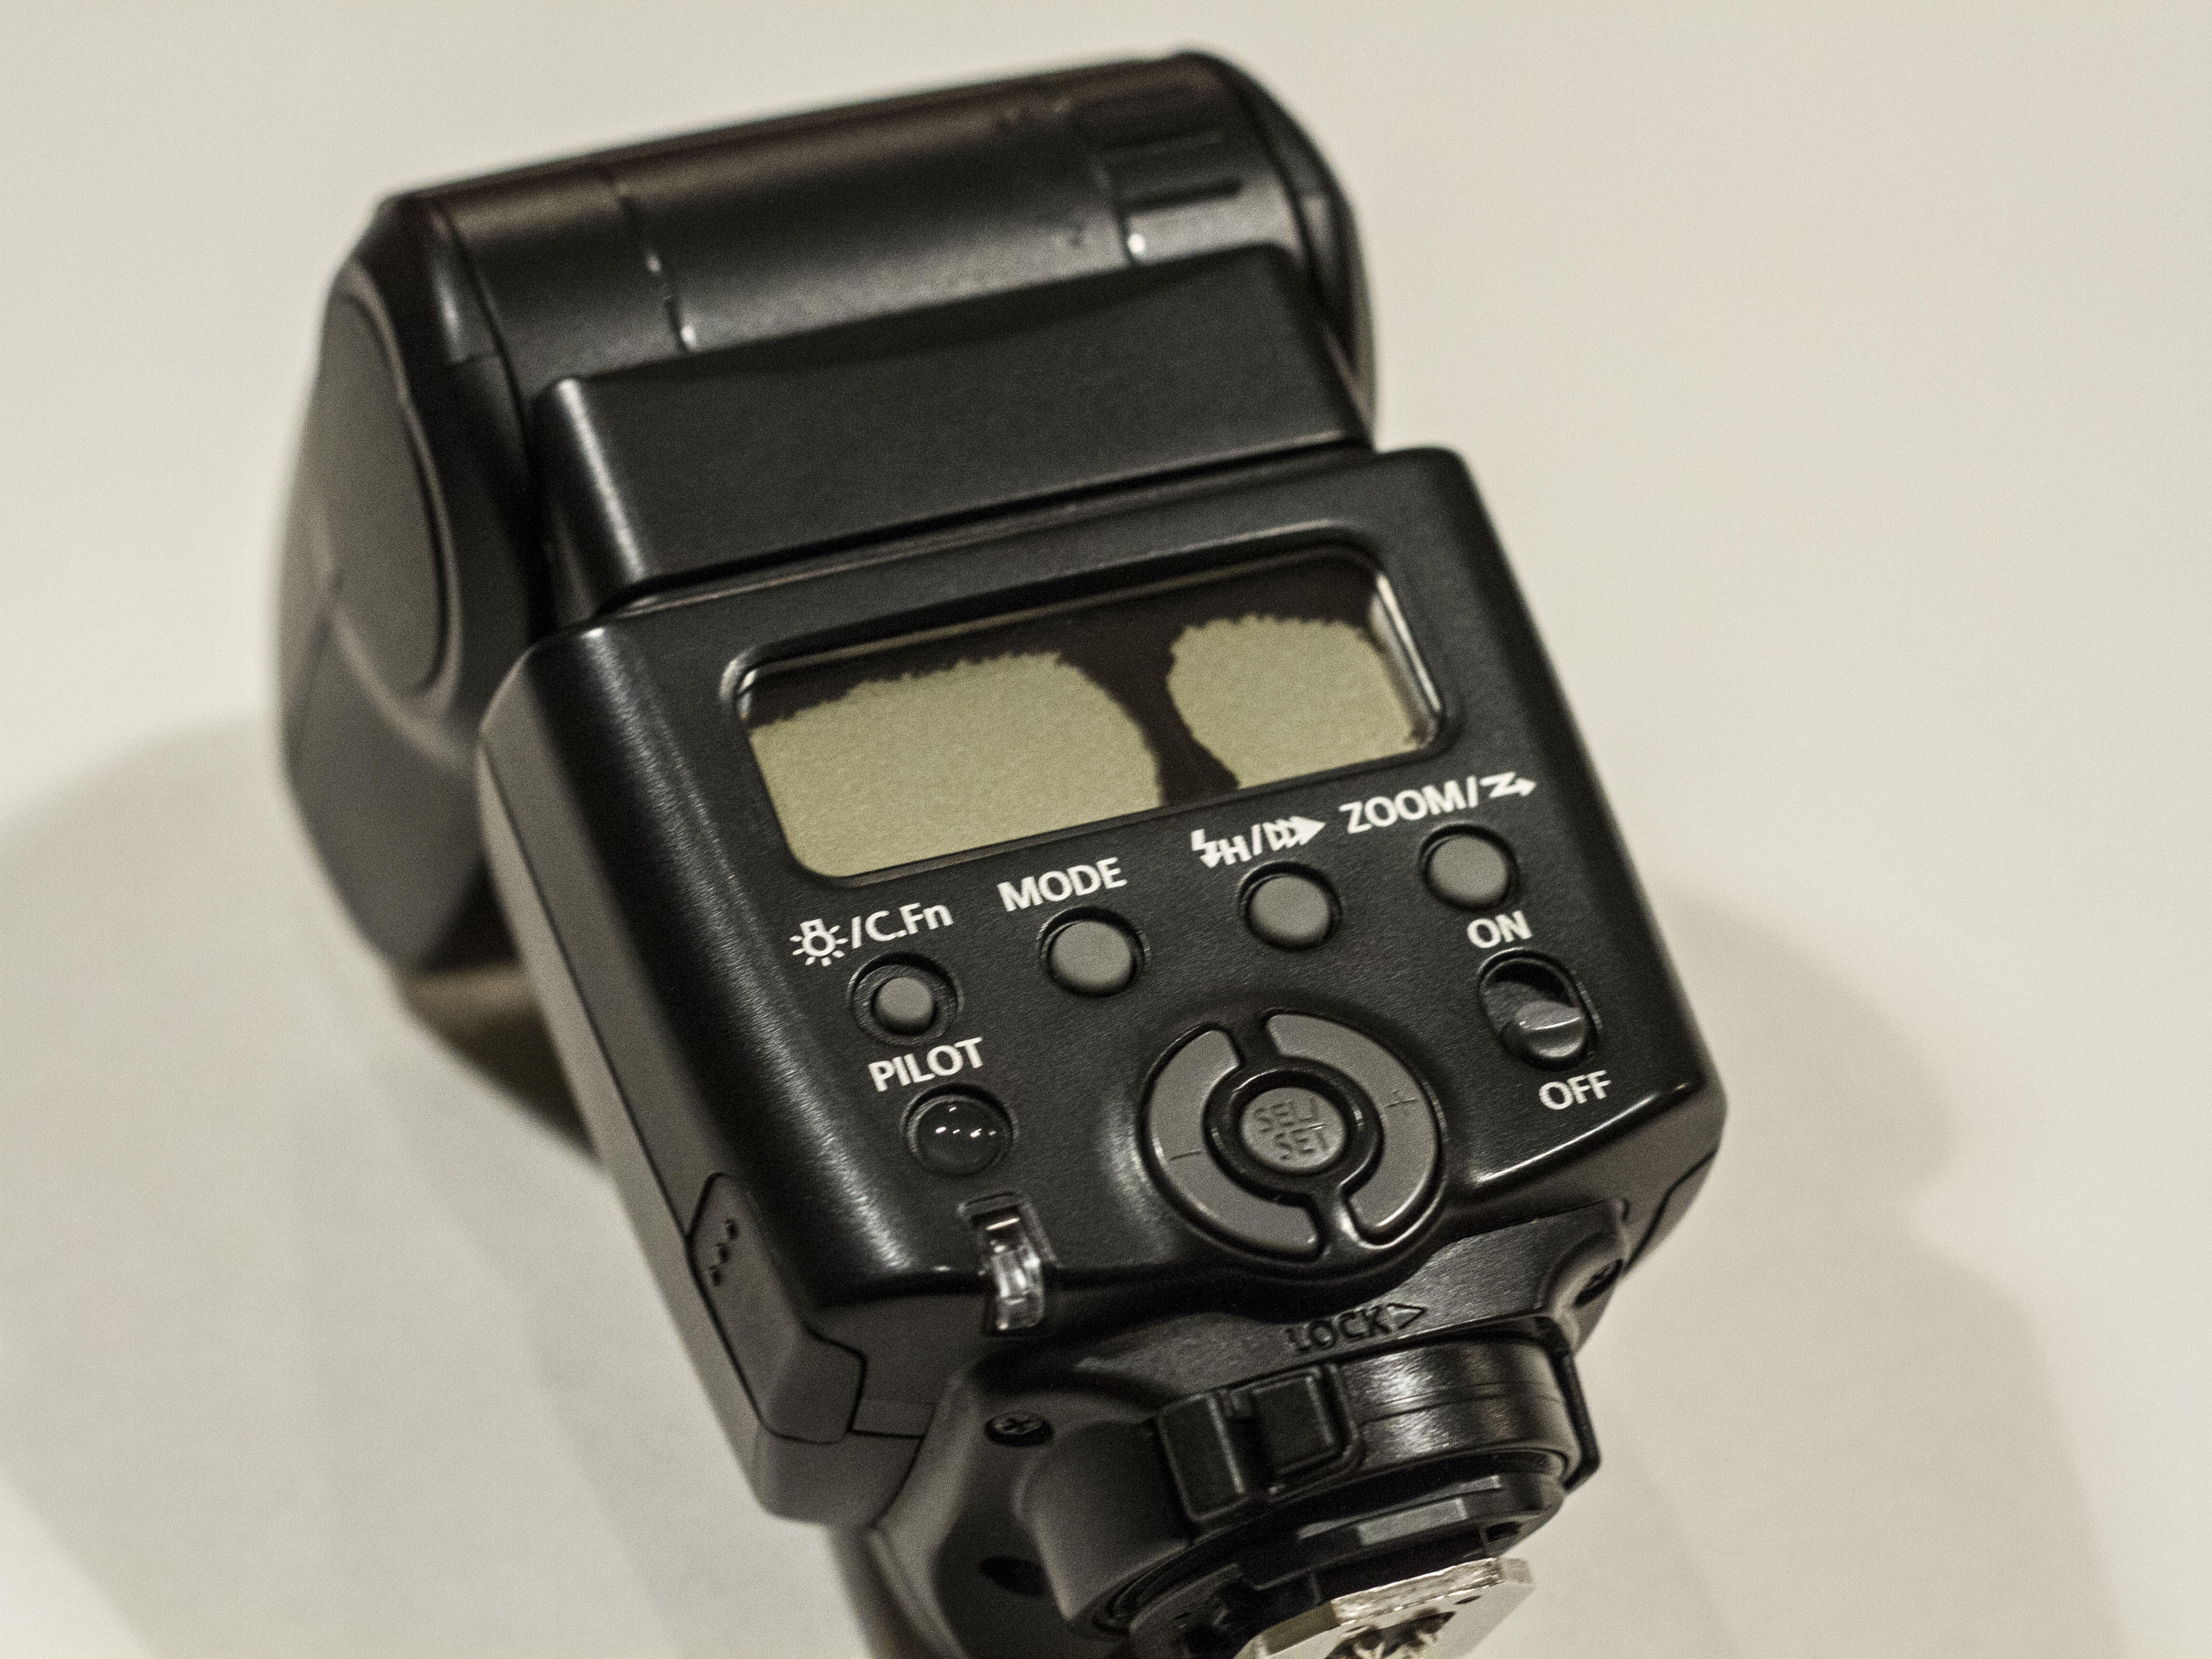 canon 430ex ii guide number